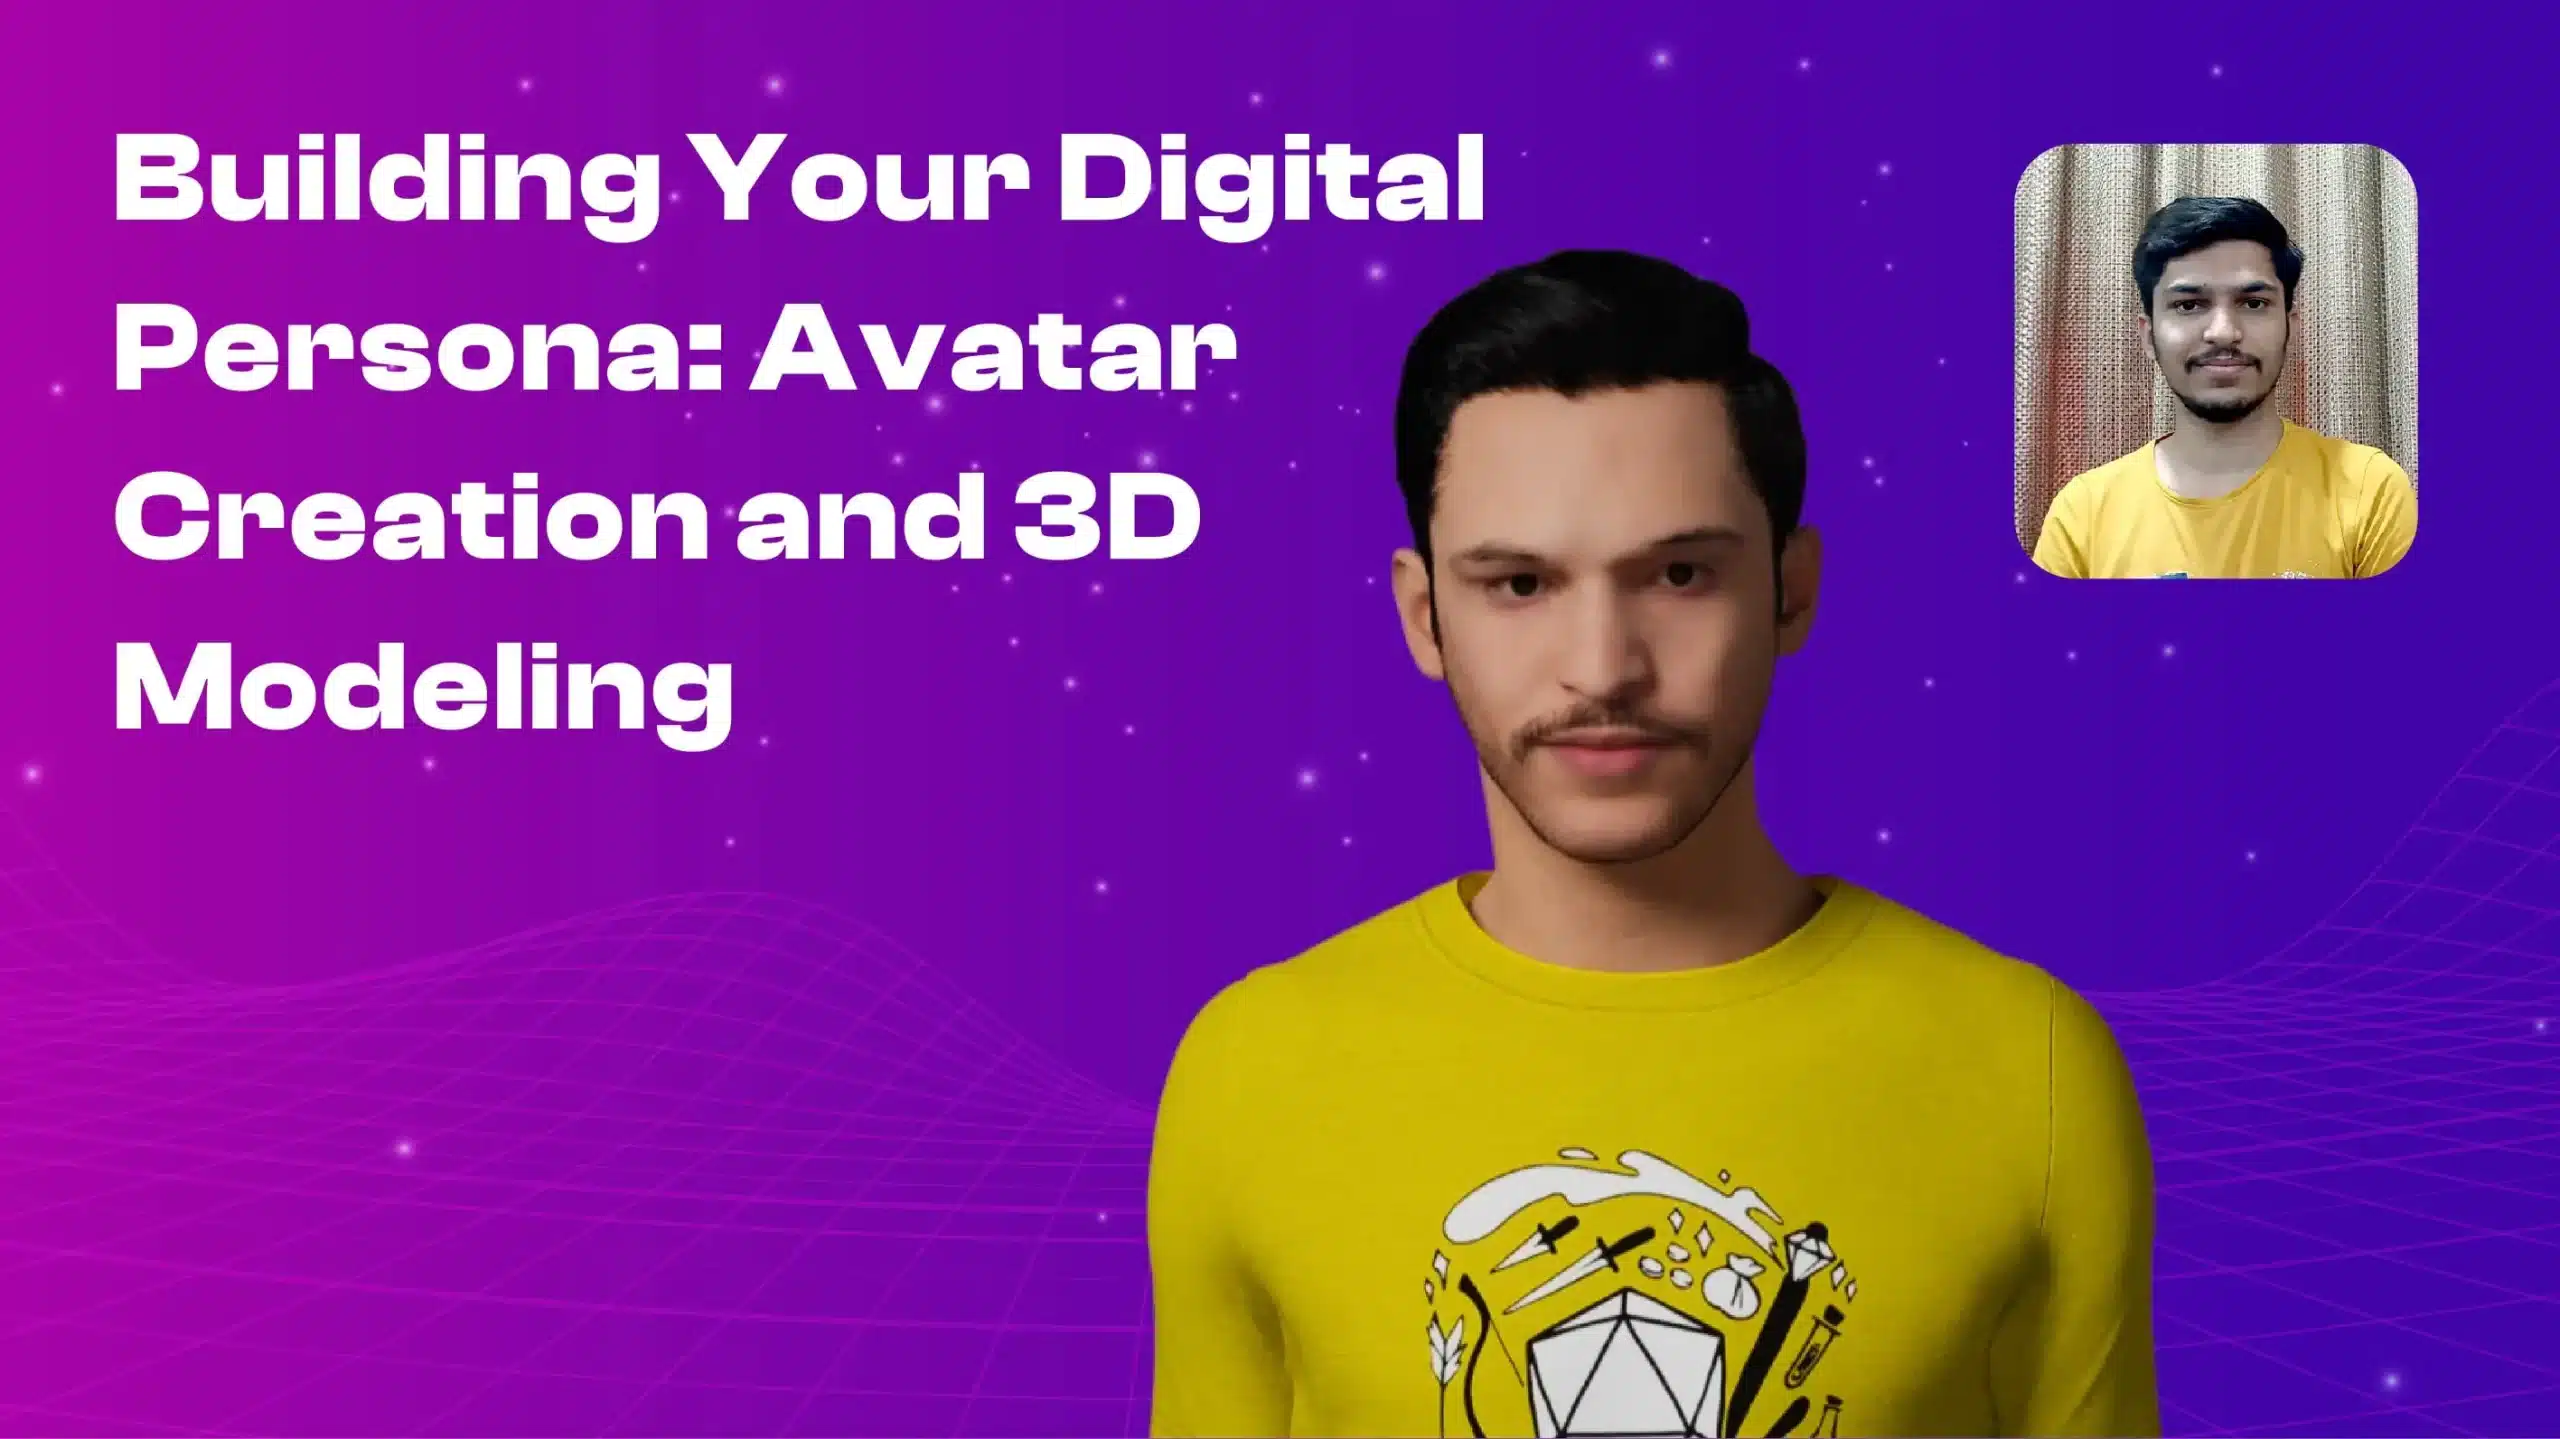 Building Your Digital Persona Avatar Creation and 3D Modeling